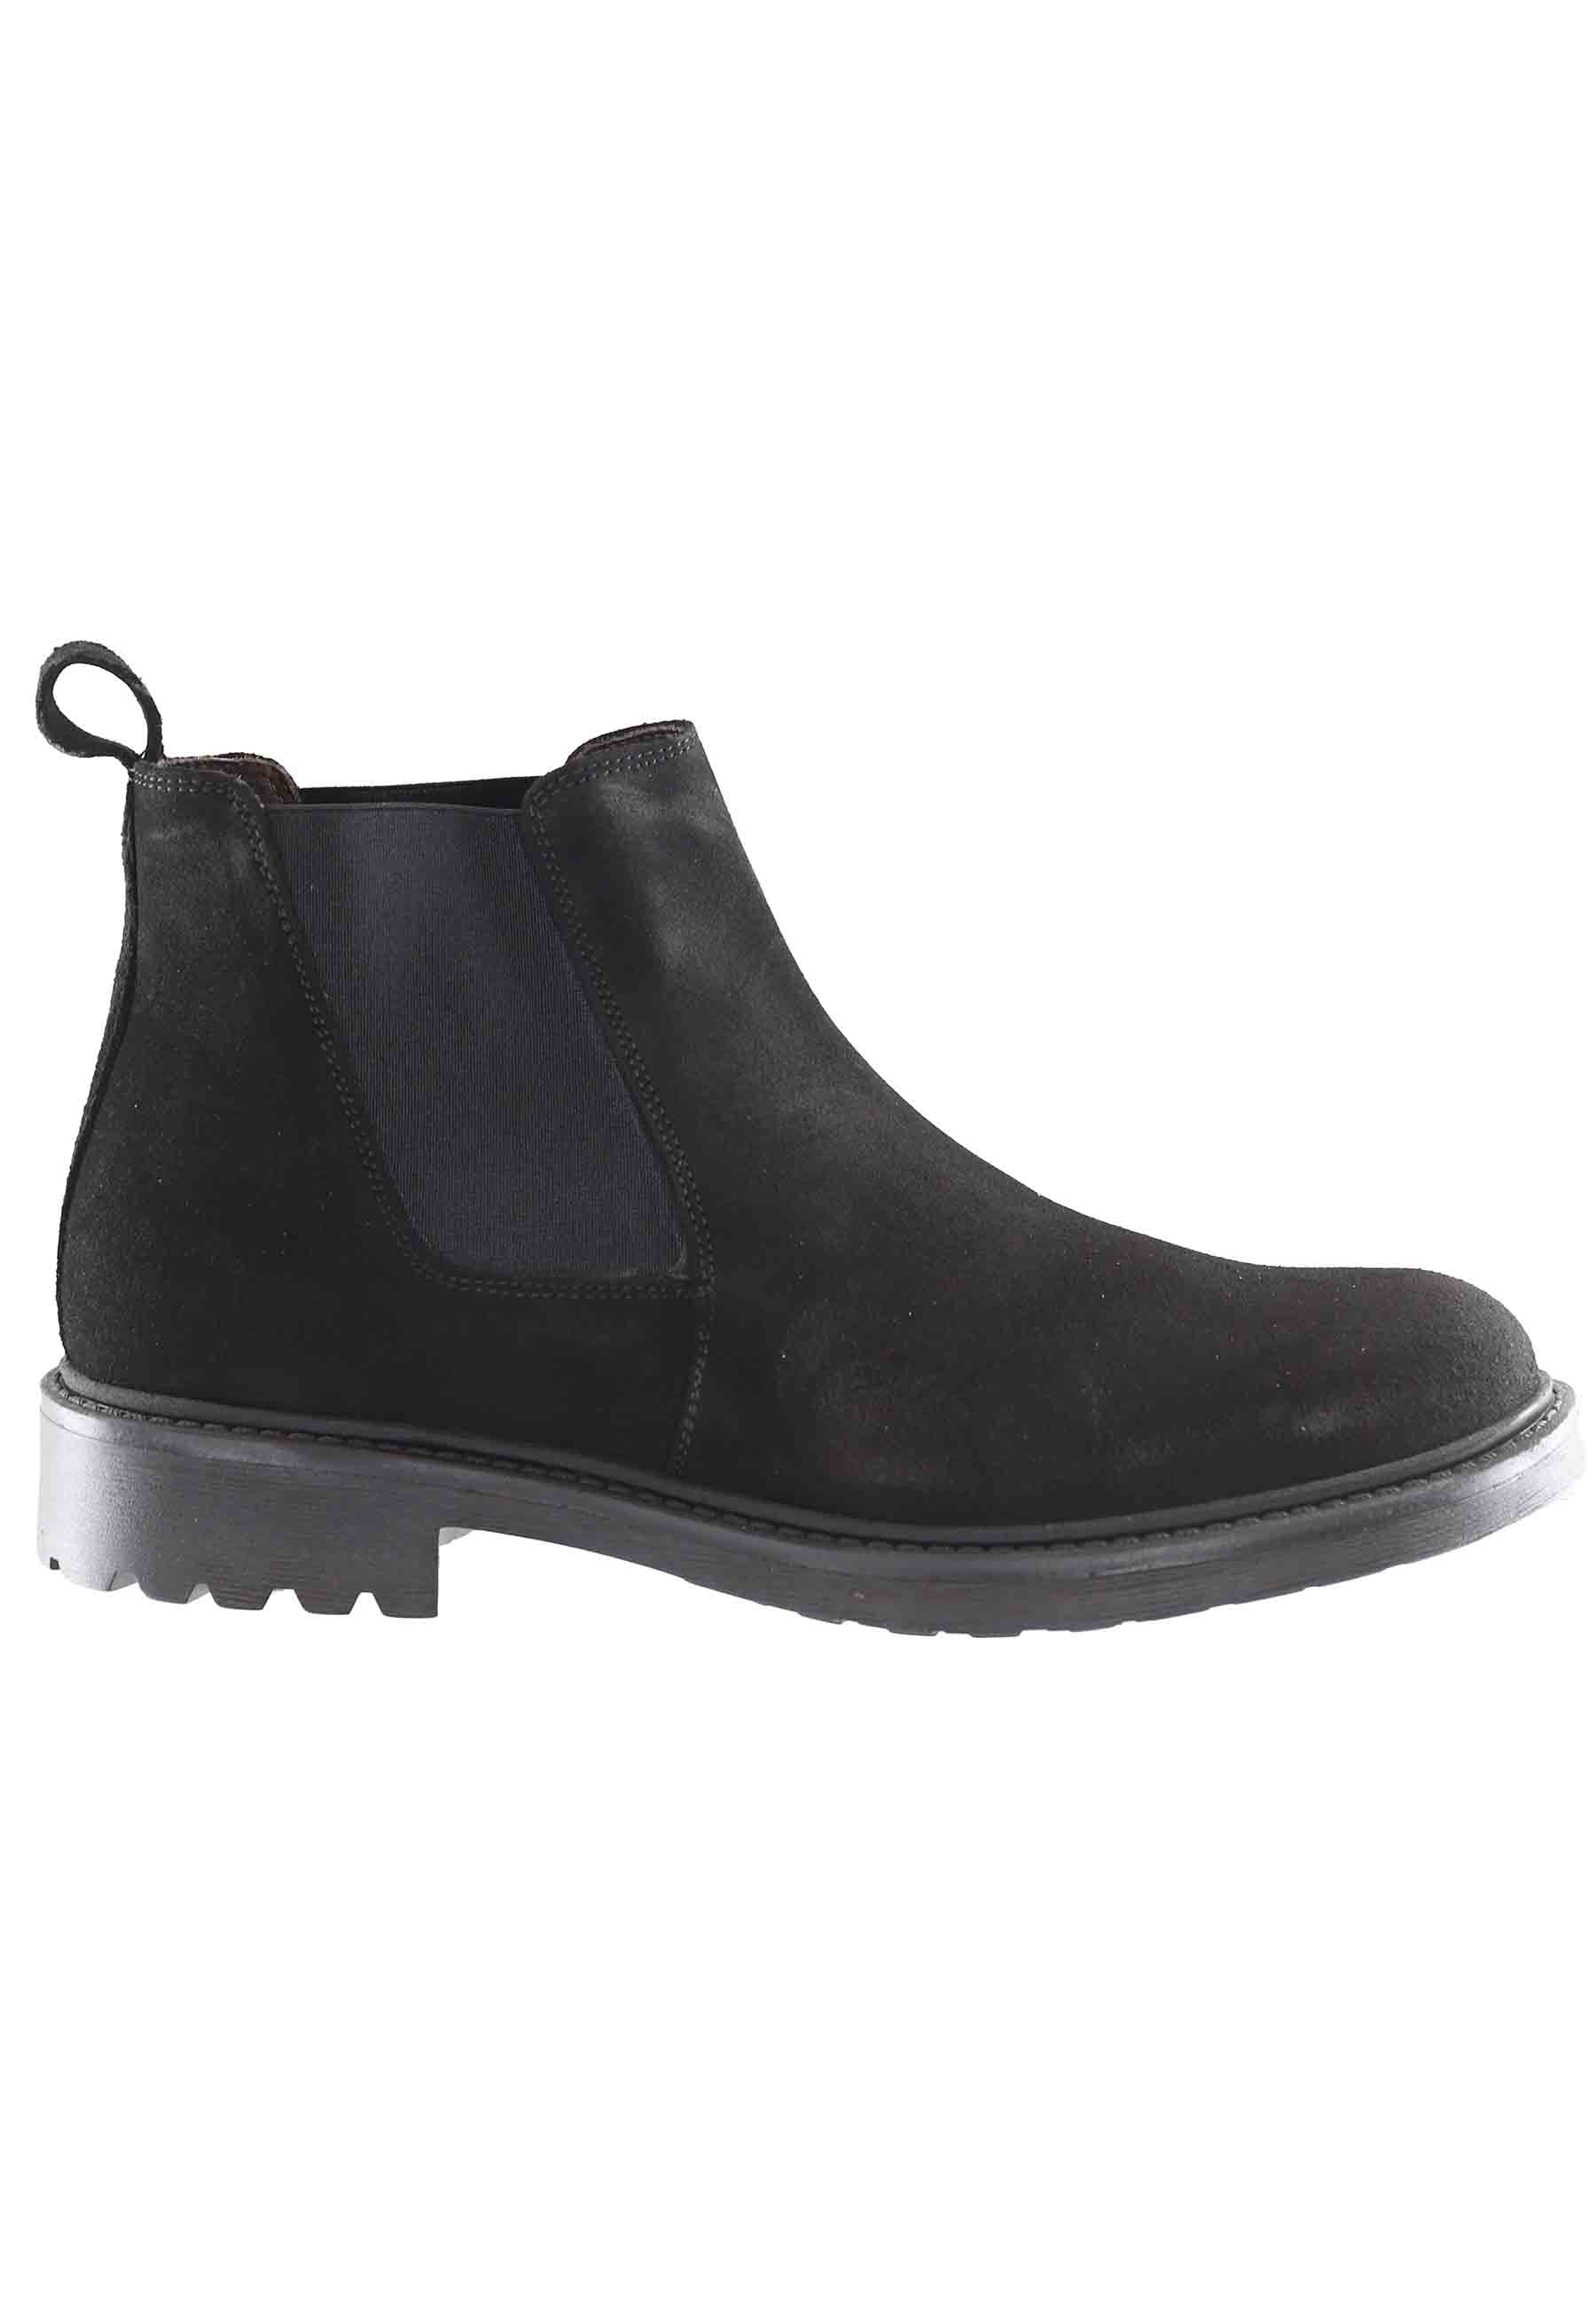 Men's Chelsea boot in black camouflage with lug sole